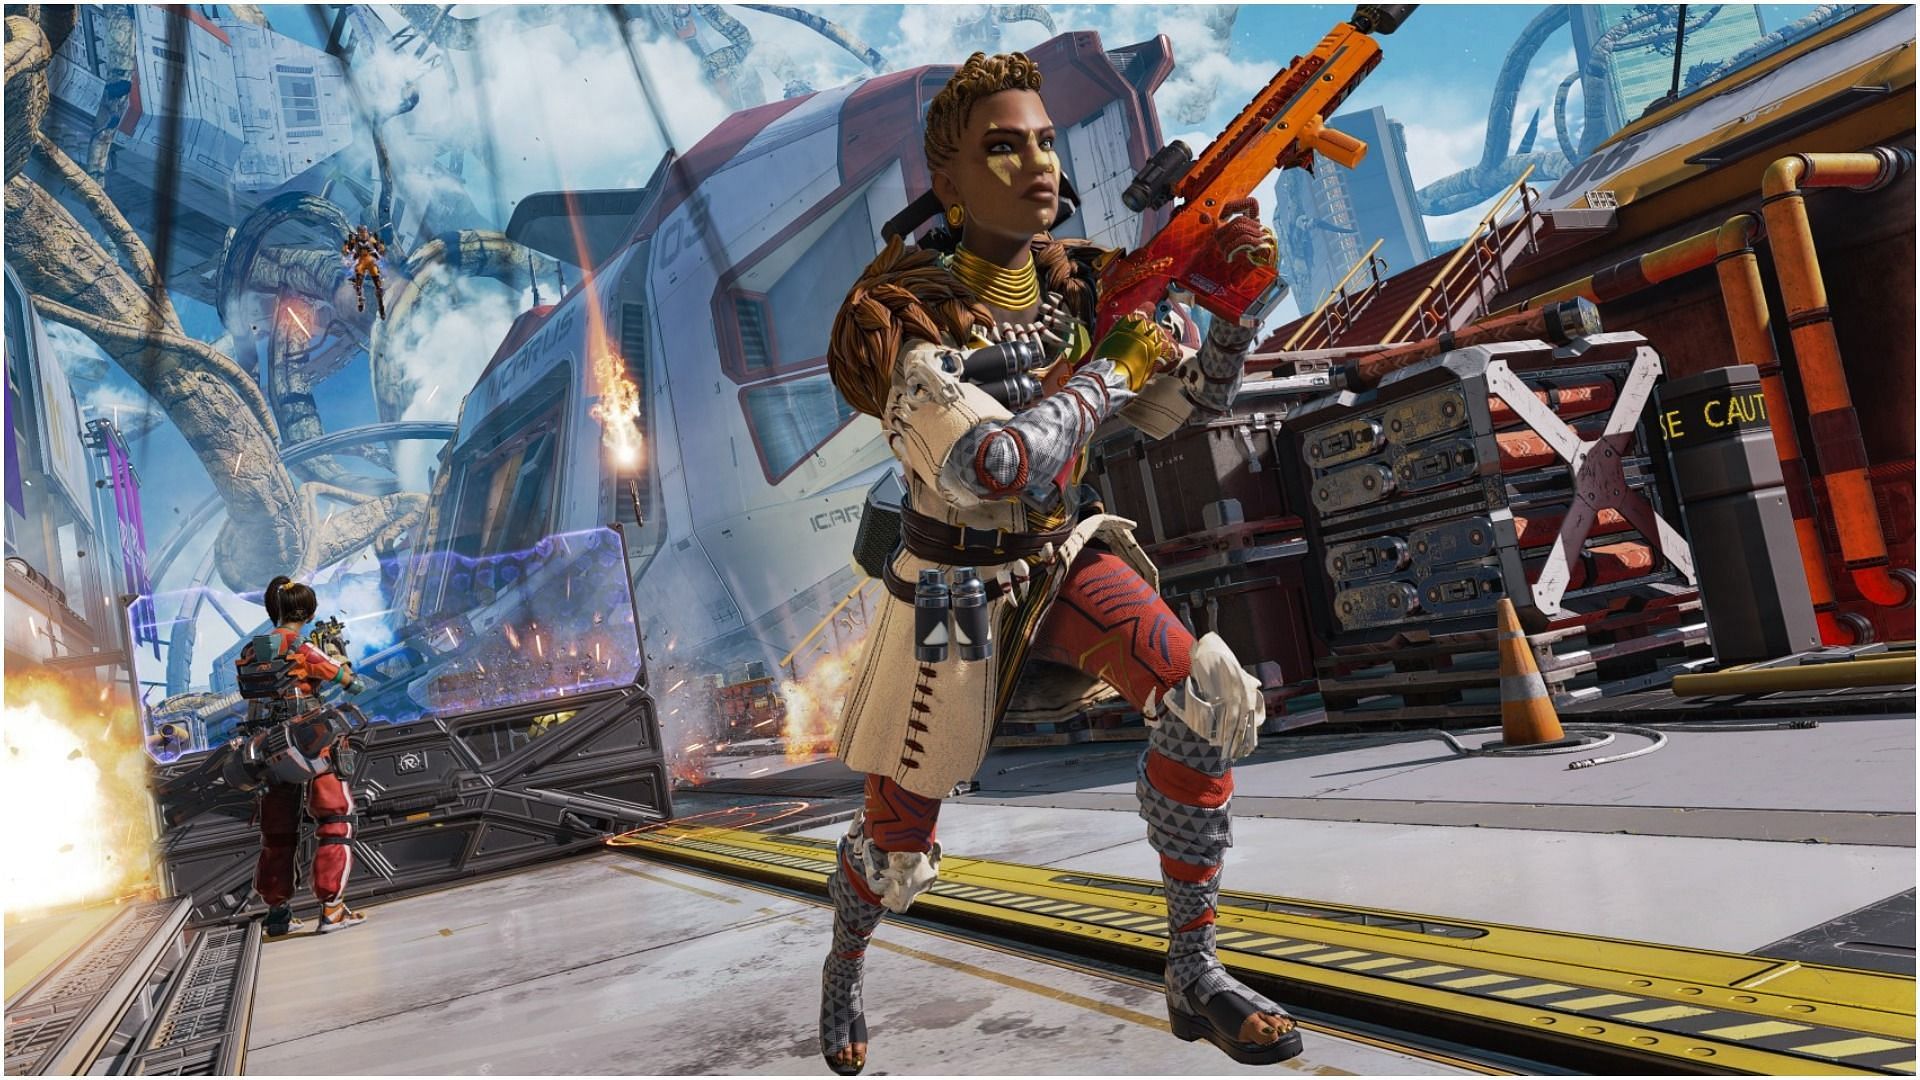 There has been a major change in the scoring system in the ranked mode in Apex Legends (Image via Respawn)